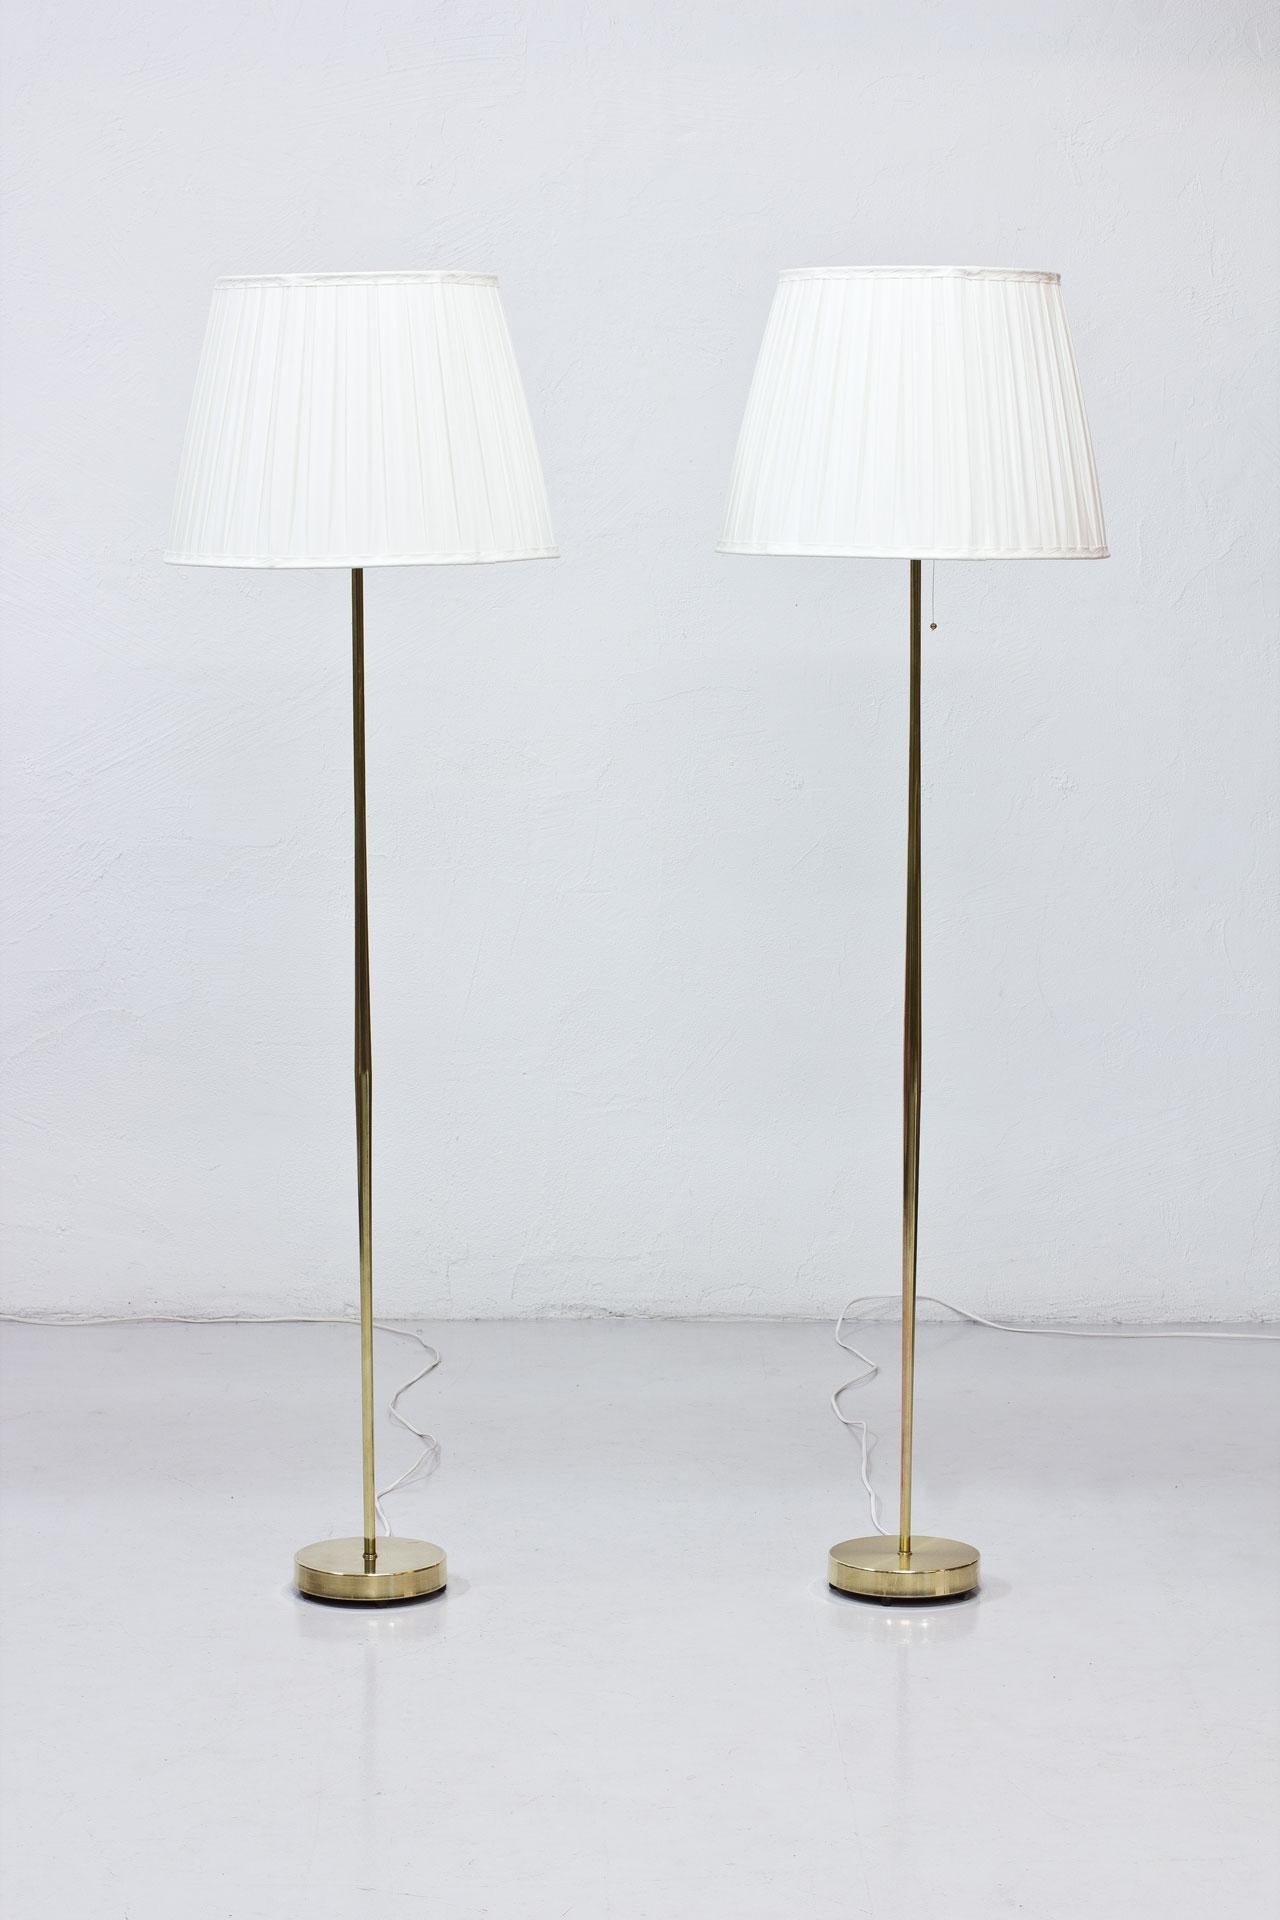 Beautiful and elegant pair of floor lamps manufactured in Sweden during the 1950s by Falkenbergs Belysning. Made from polished brass stem and fittings with new box pleated lamp shades in off- white chintz fabric. New electricity with light switch on